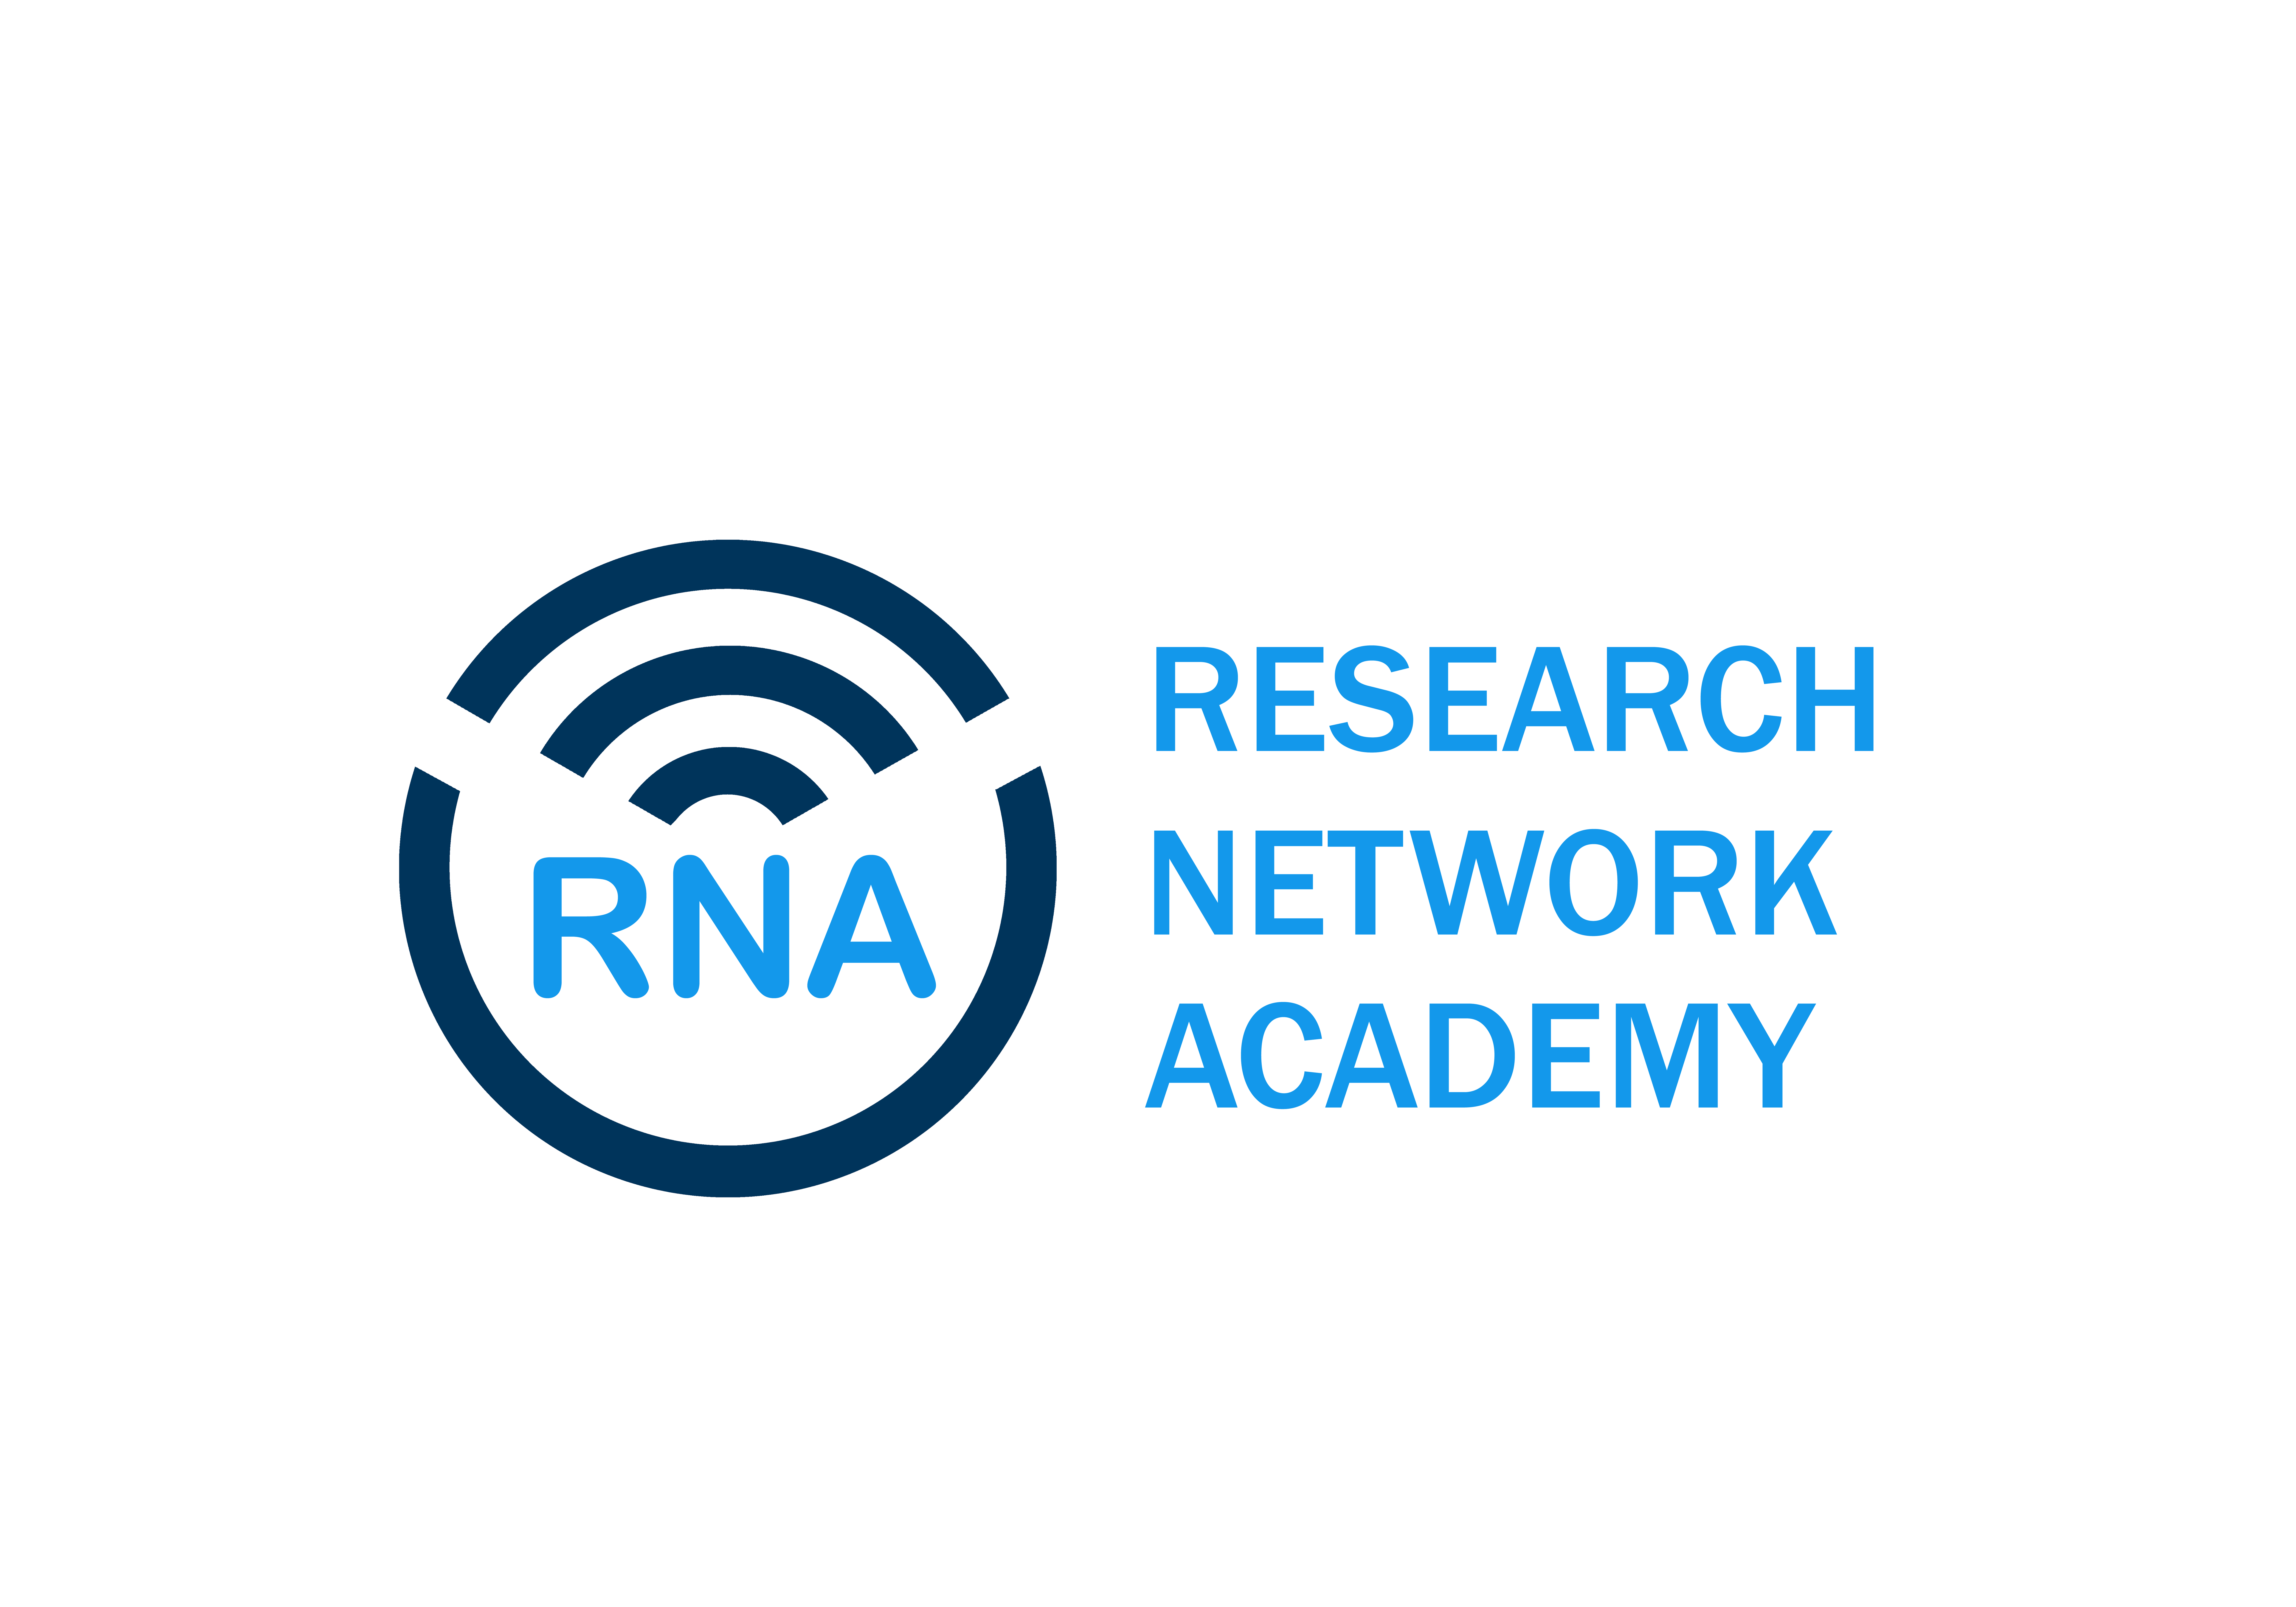 Research Network Academy